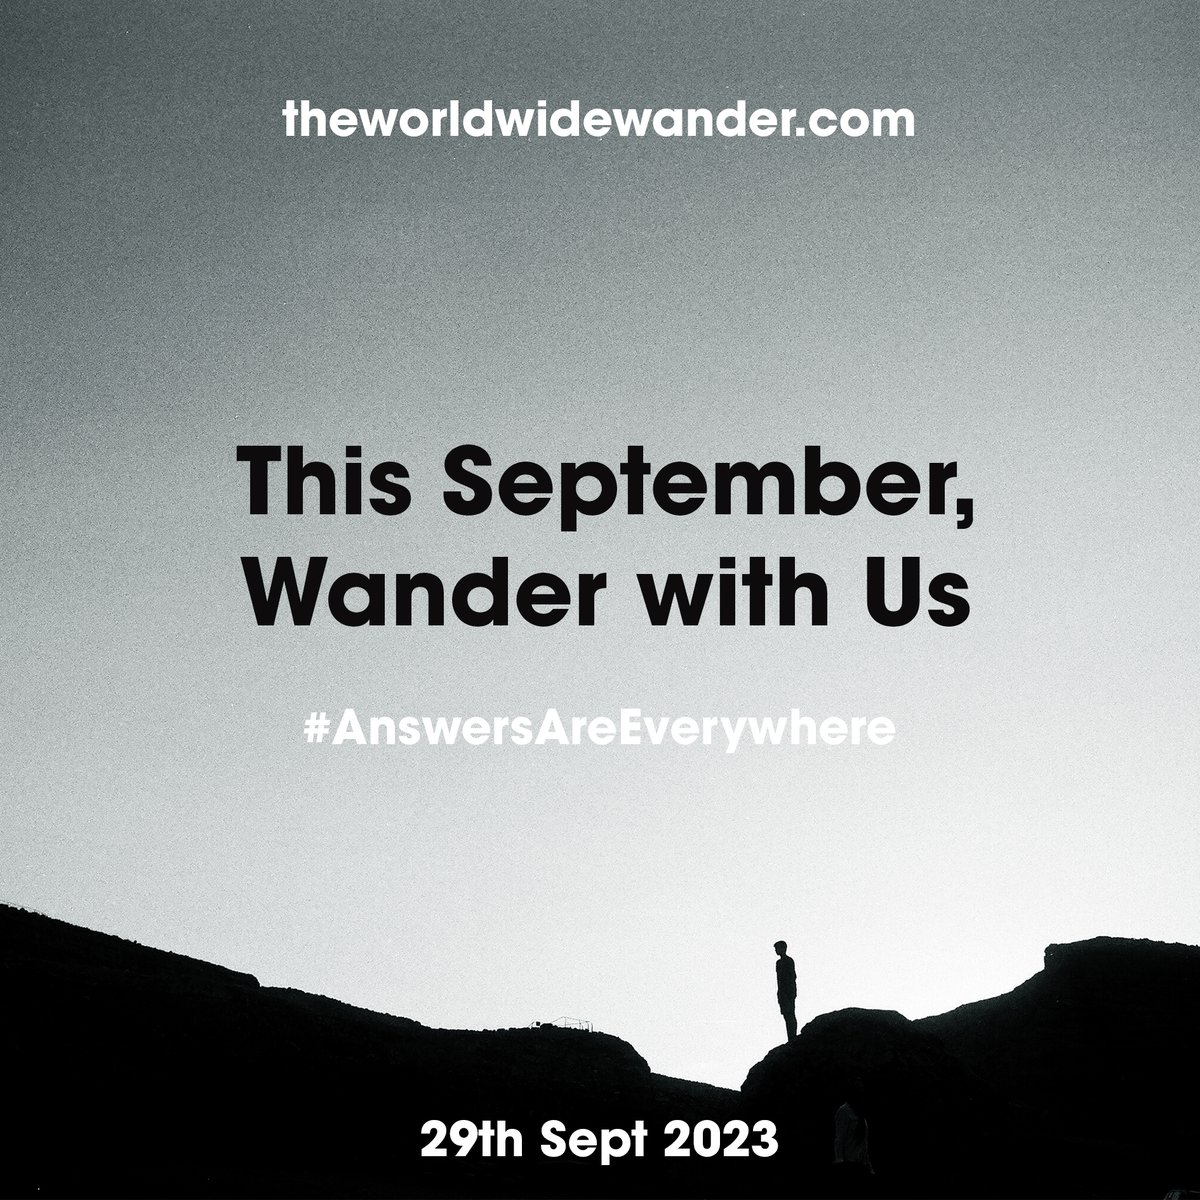 The World Wide Wander is back! Join me and some lovely, creative humans this September for a global wander-fest. It's Free. It's fun. It's time! theworldwidewander.com